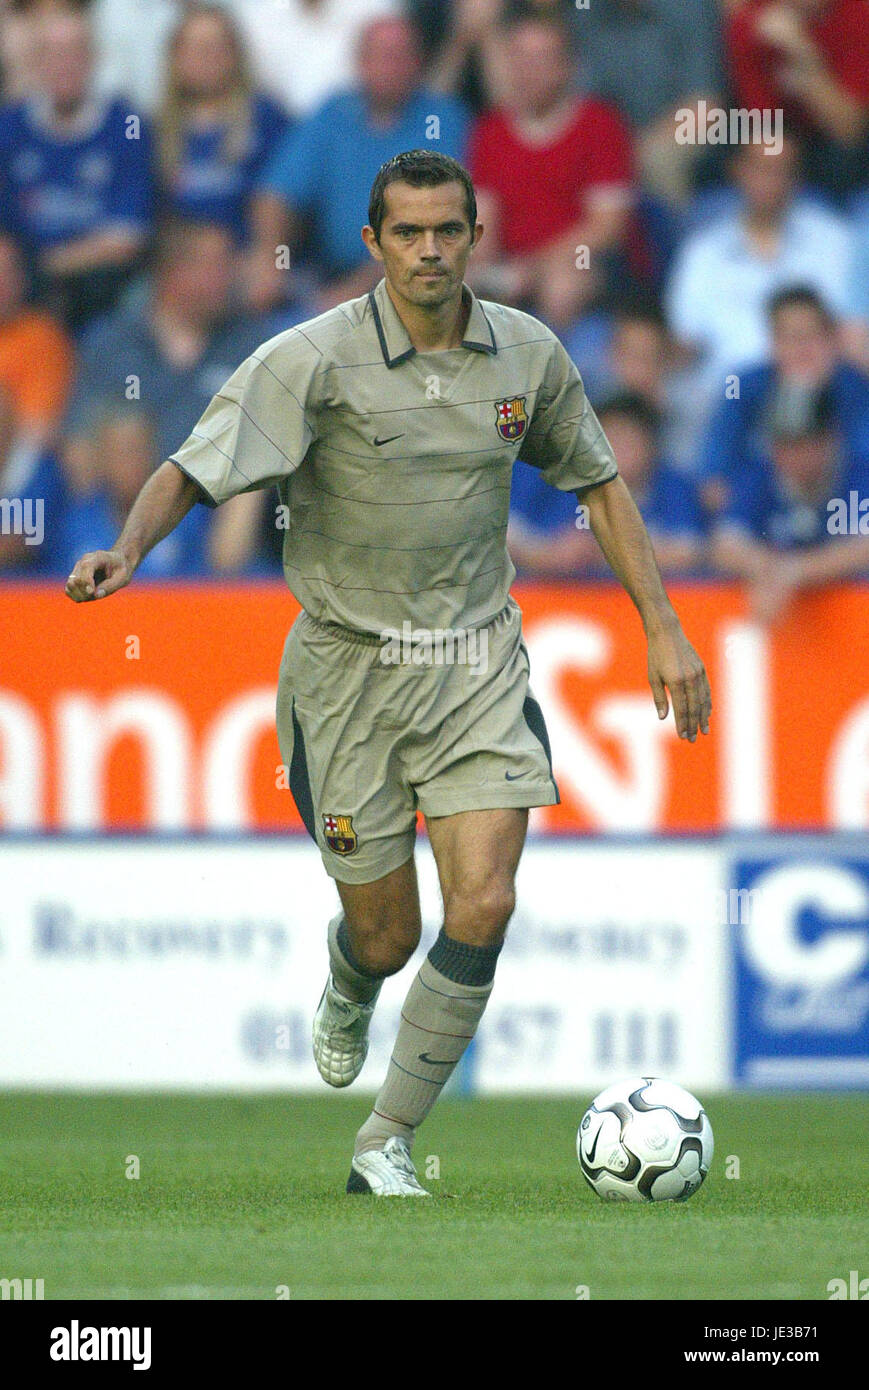 PHILIP COCU FC Barcelone stade WALKERS LEICESTER ANGLETERRE 08 Août 2003 Banque D'Images